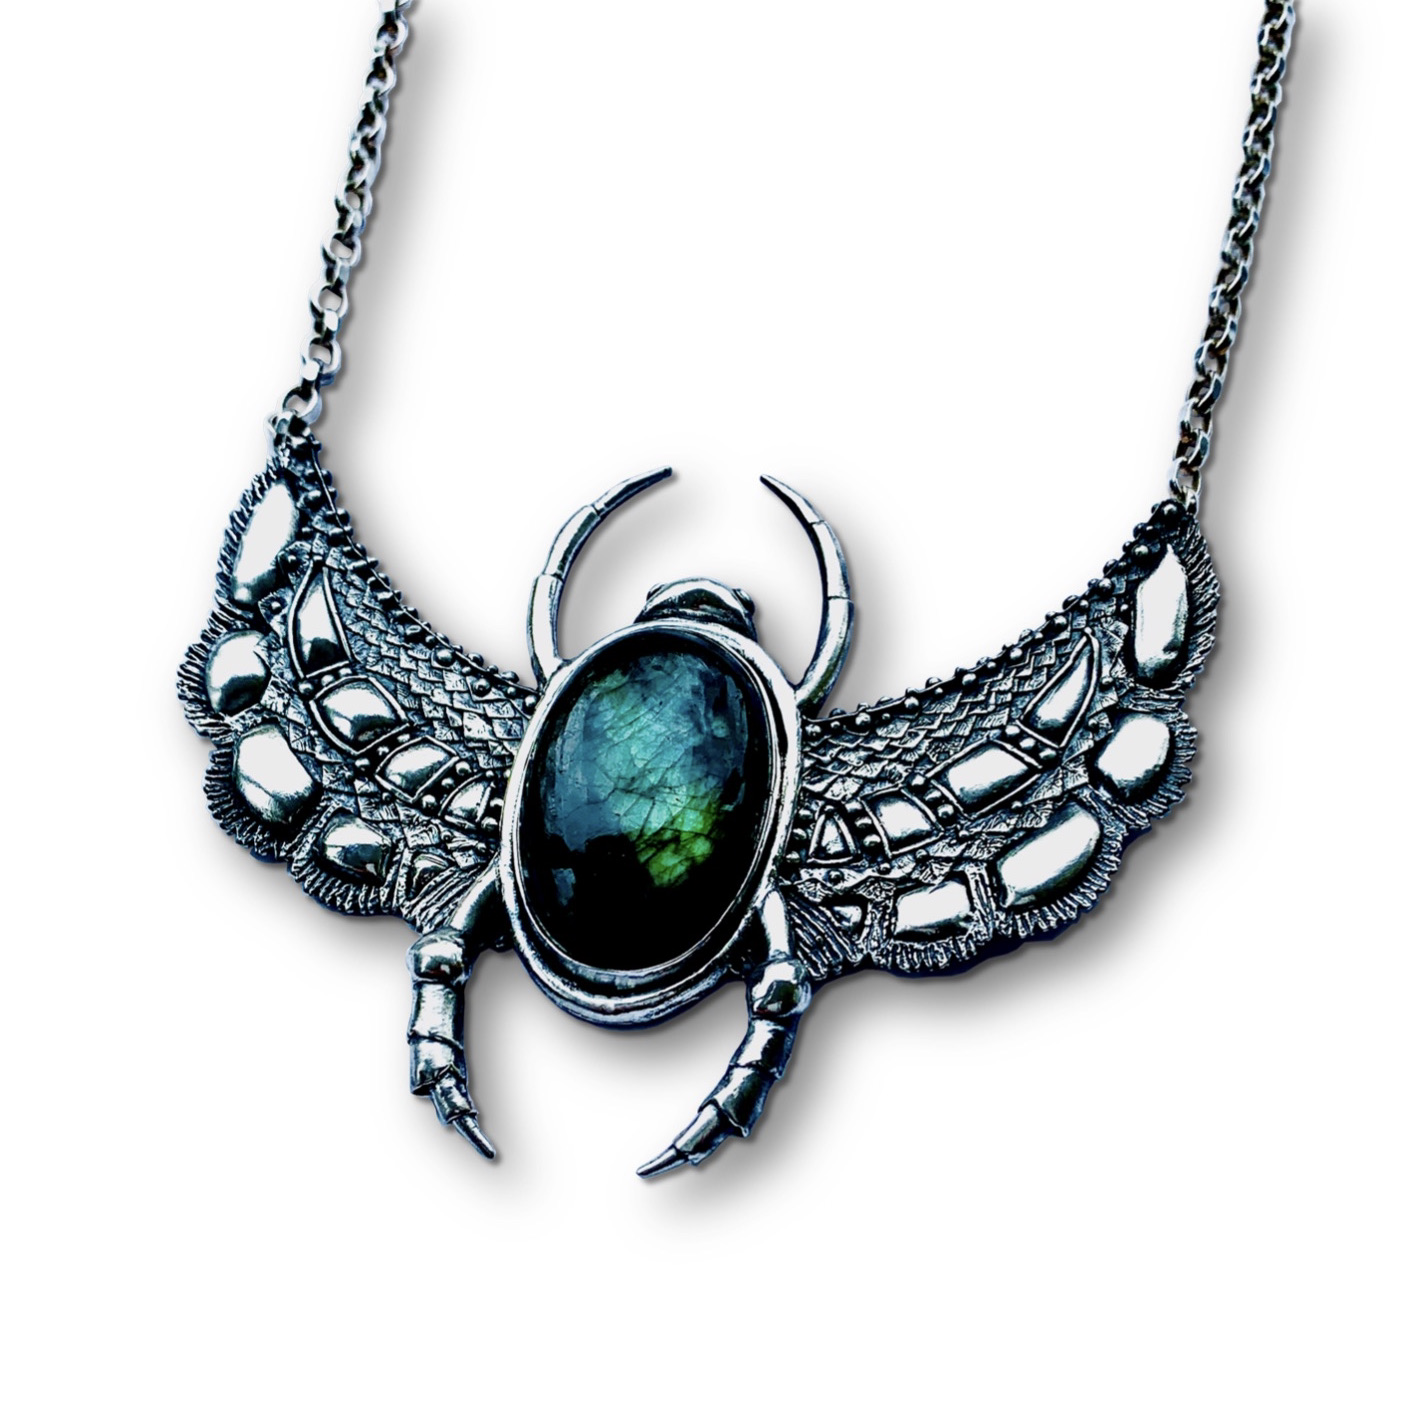 Scarab by Tracey Spurgin of Craftworx